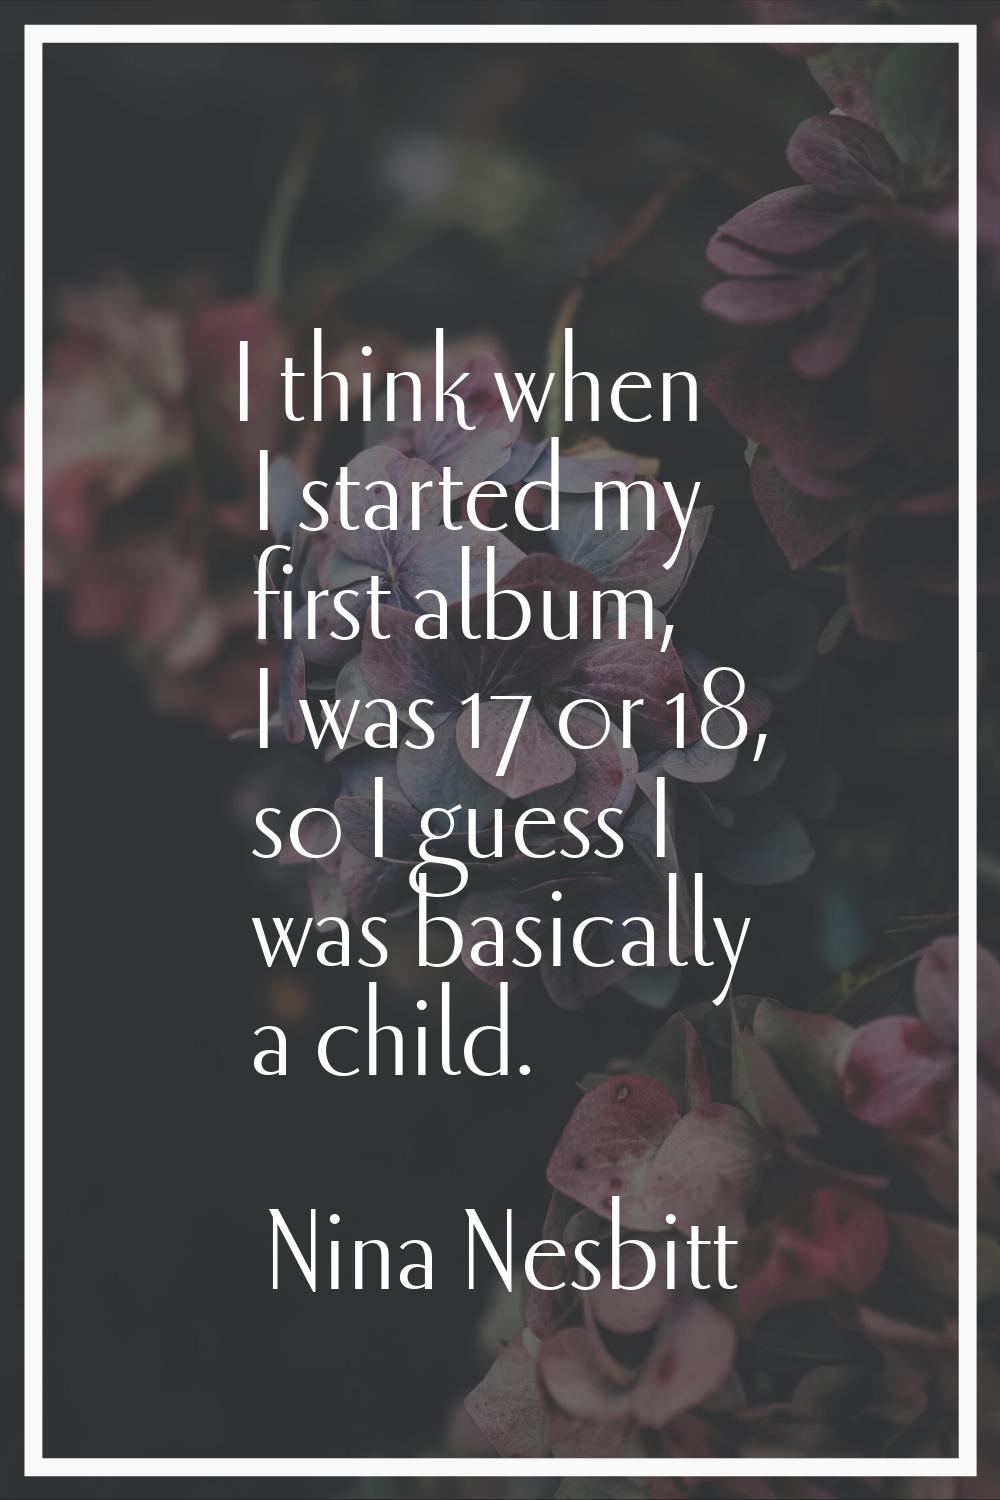 I think when I started my first album, I was 17 or 18, so I guess I was basically a child.